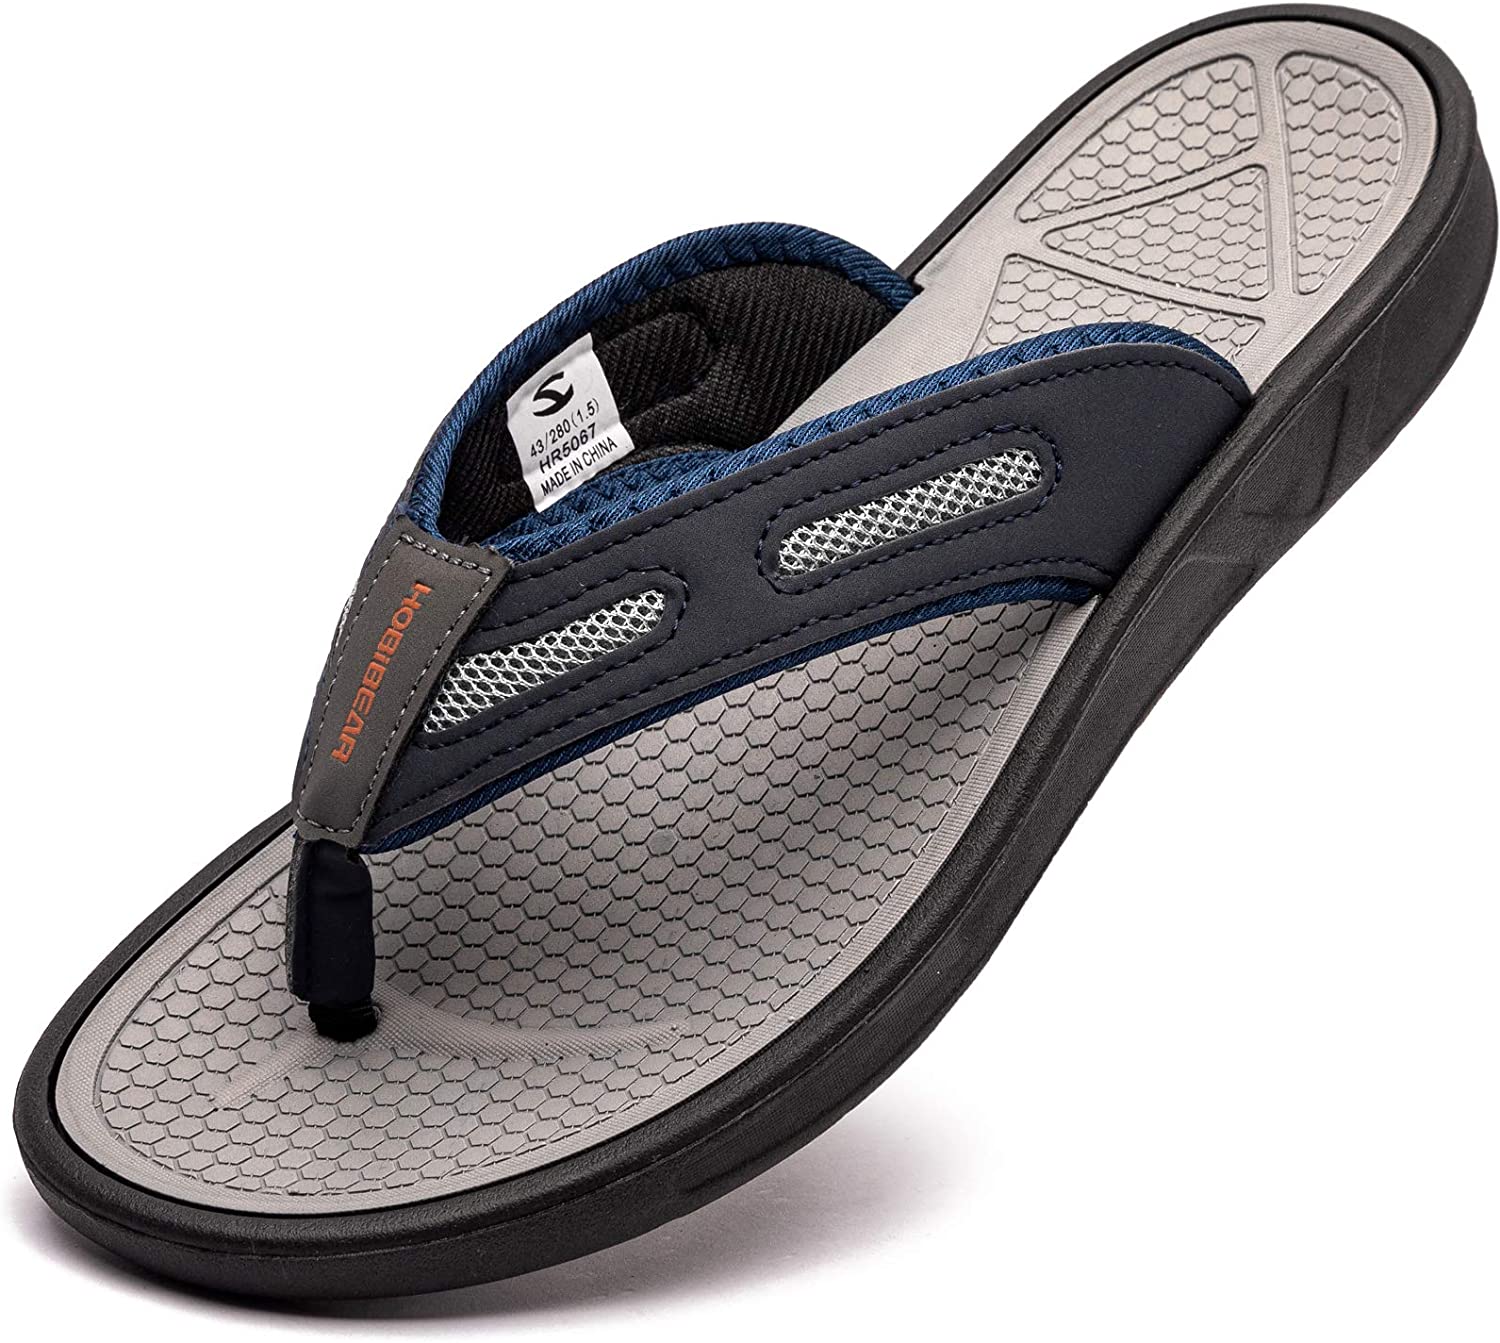 JHFEAW Flip Flop Mens Indoor and Outdoor Beach Thong Sandals 